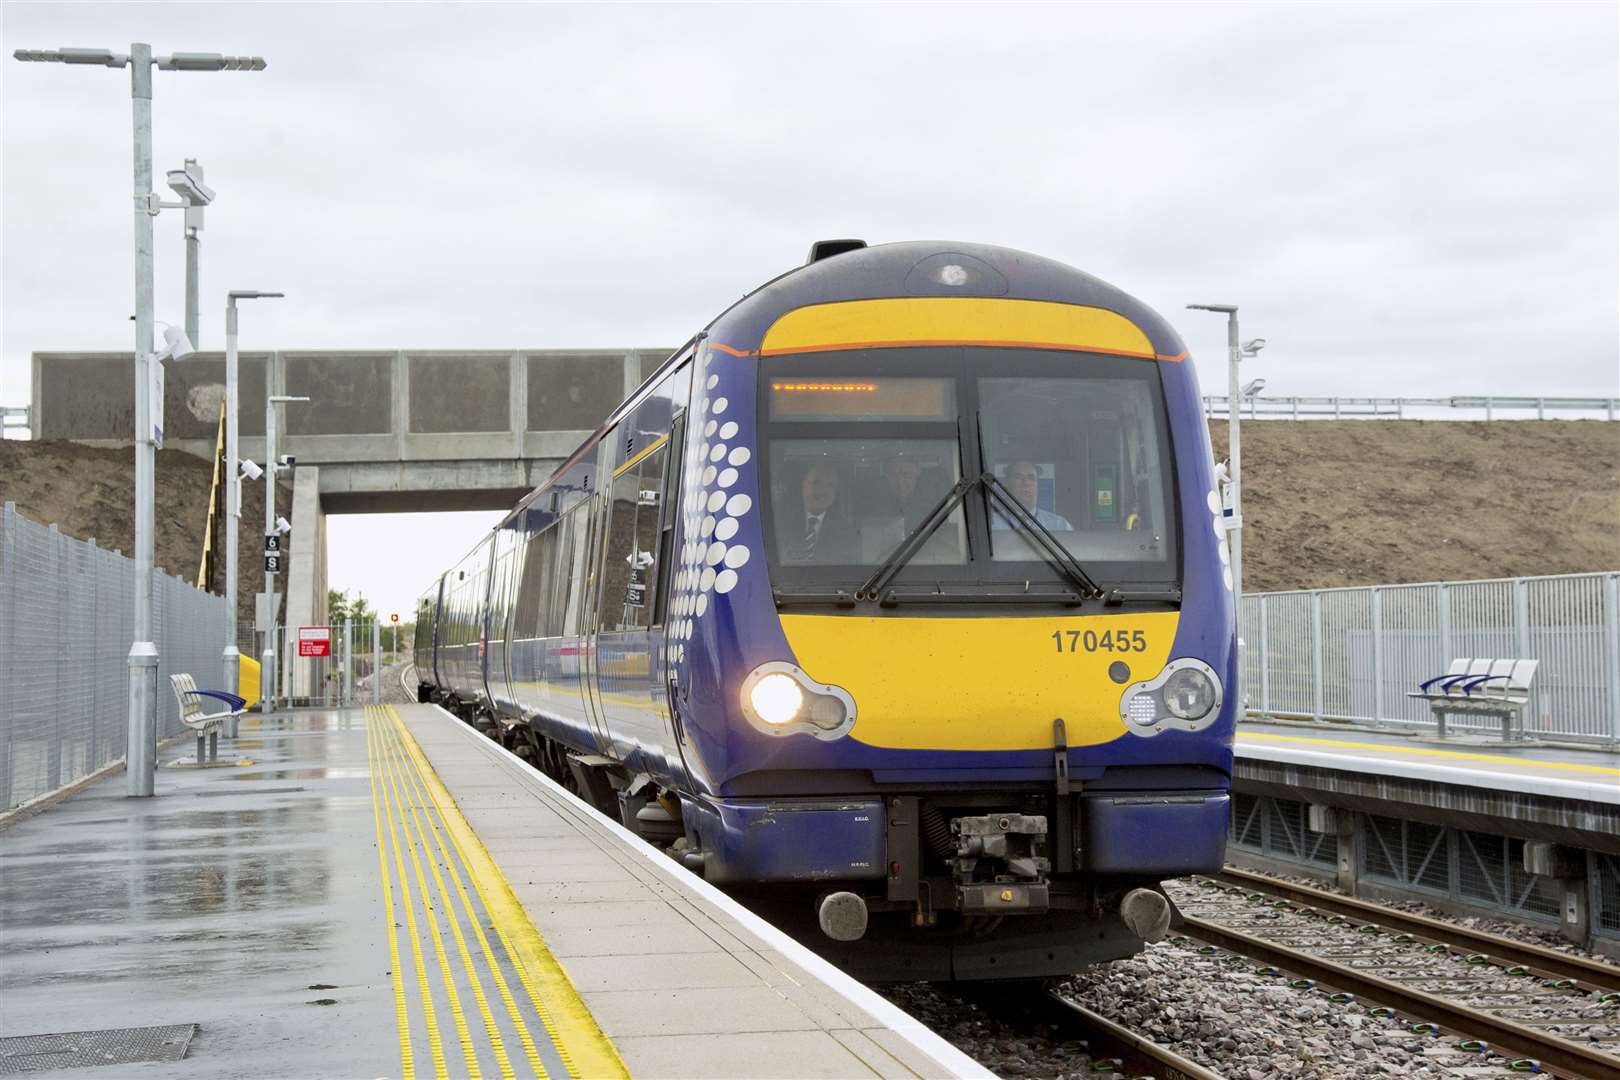 A ScotRail train arrives into Forres Train Station.